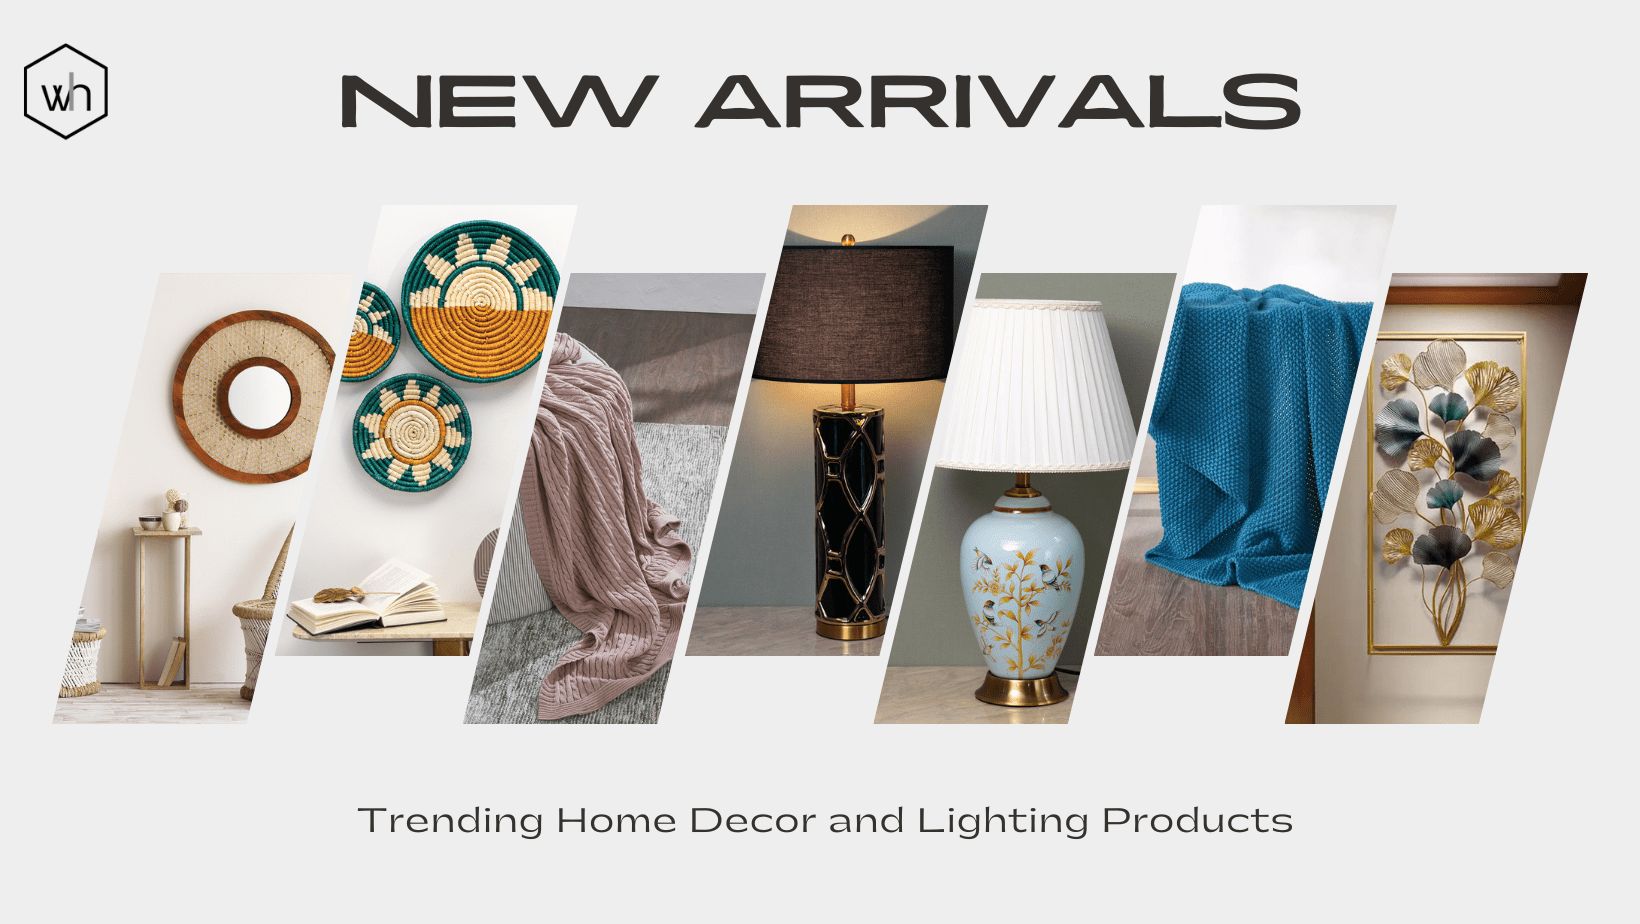 New Arrivals: Trending Home Decor and Lighting Products